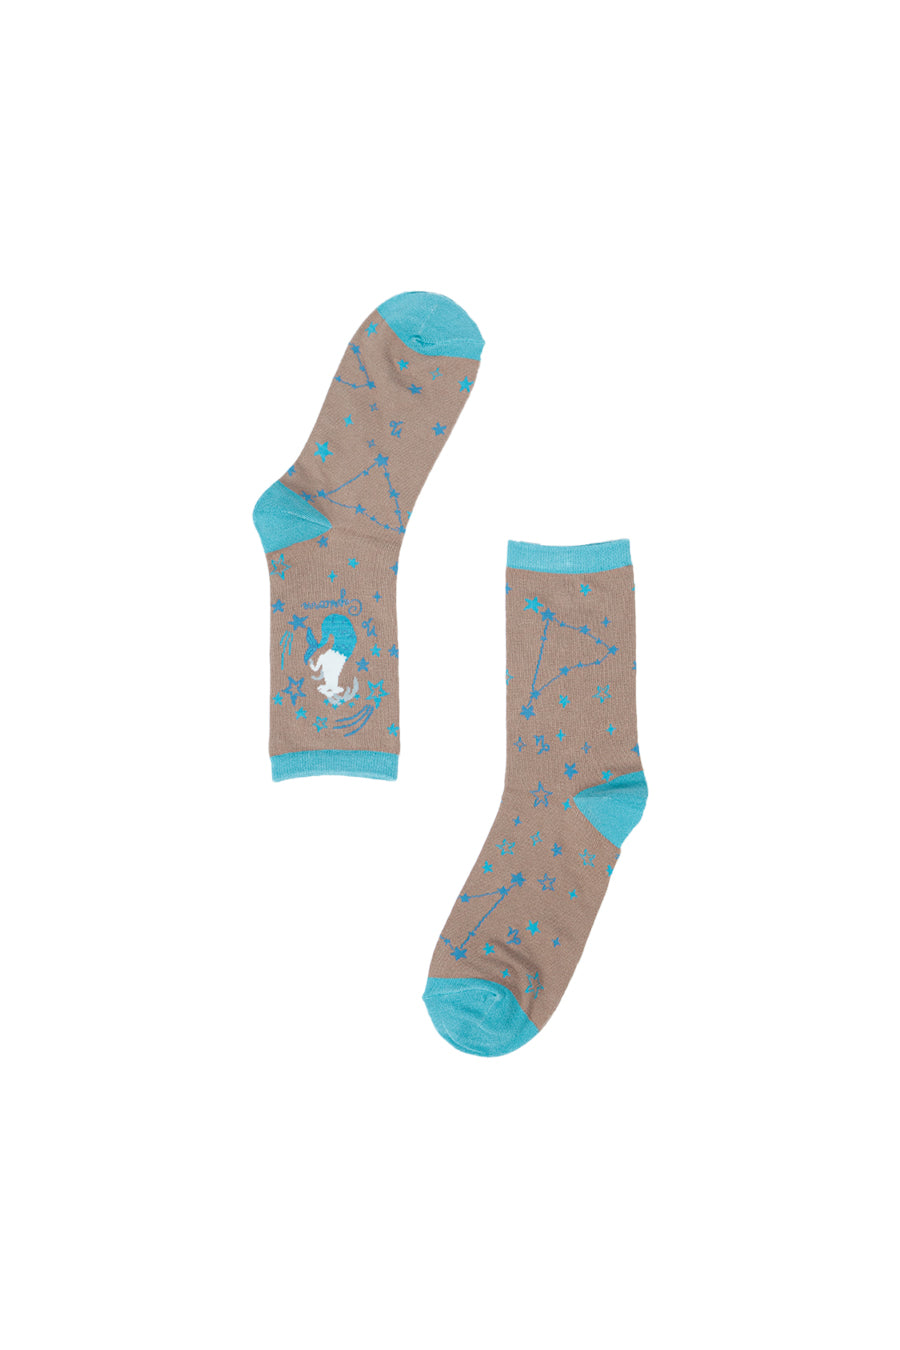 grey, blue bamboo socks with the zodiac sign of capricorn